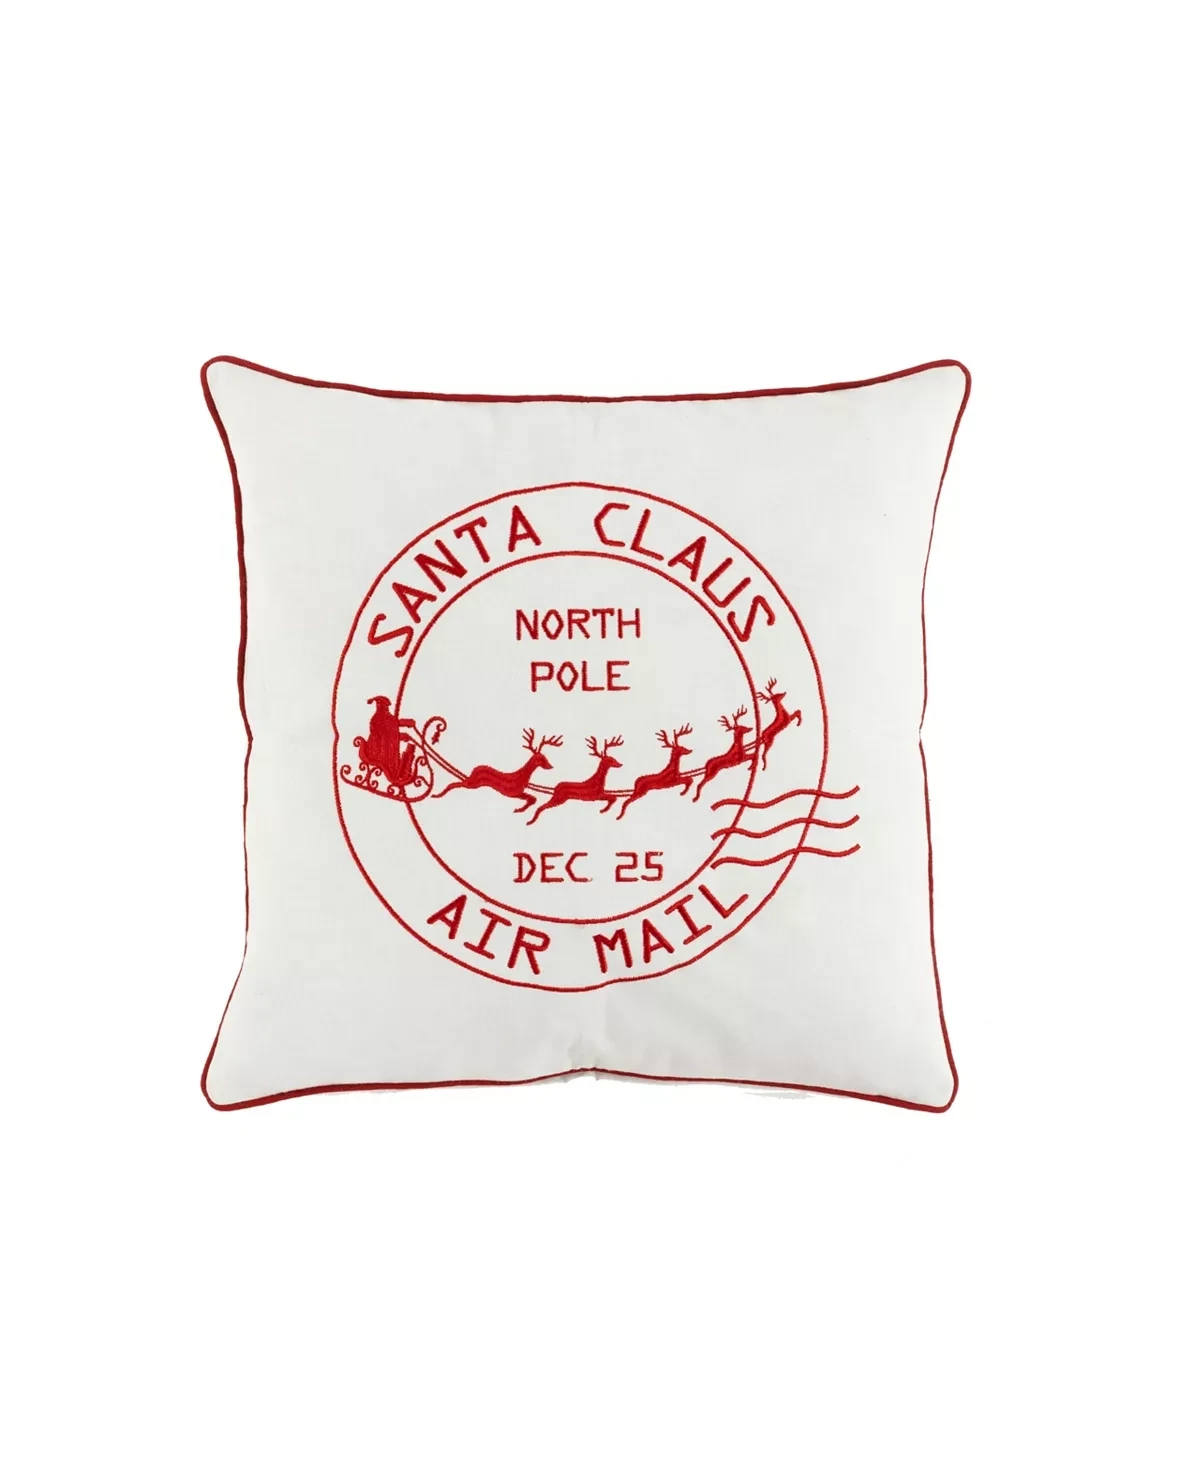 The Mountain Home Collection Santa Claus Air Mail Decorative Pillow, 20 X 20, White